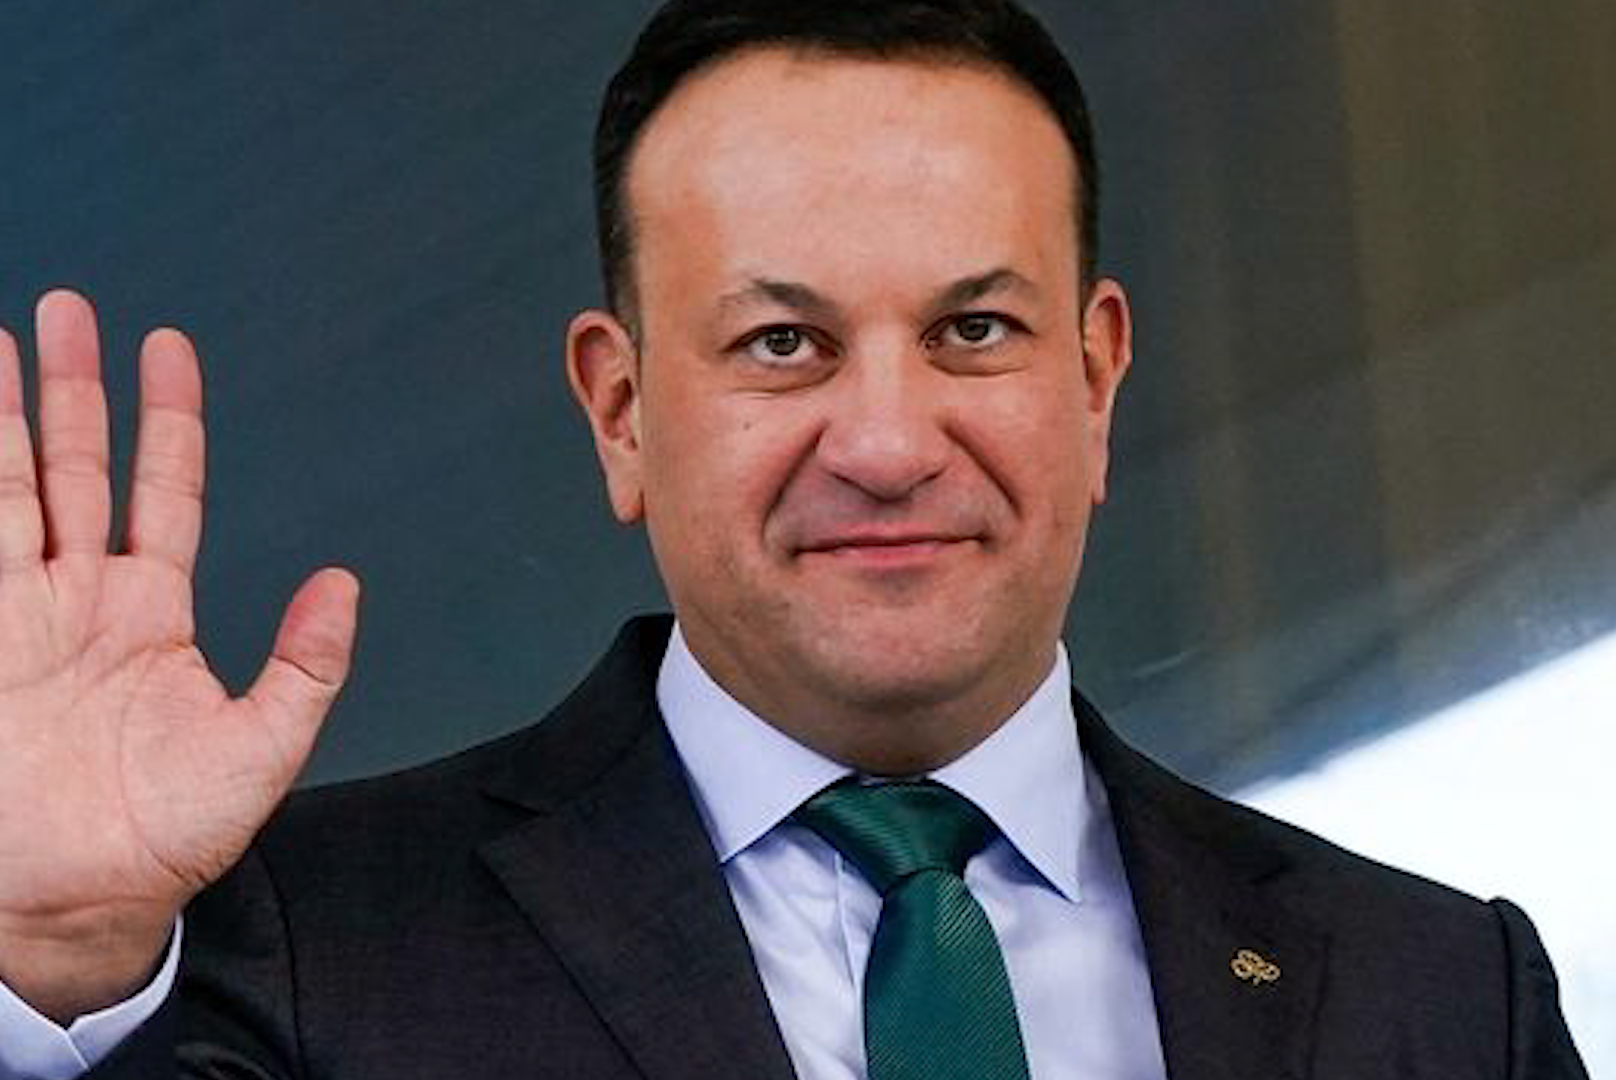 Irish Prime Minister speaks about Irish people’s connection to Palestinians